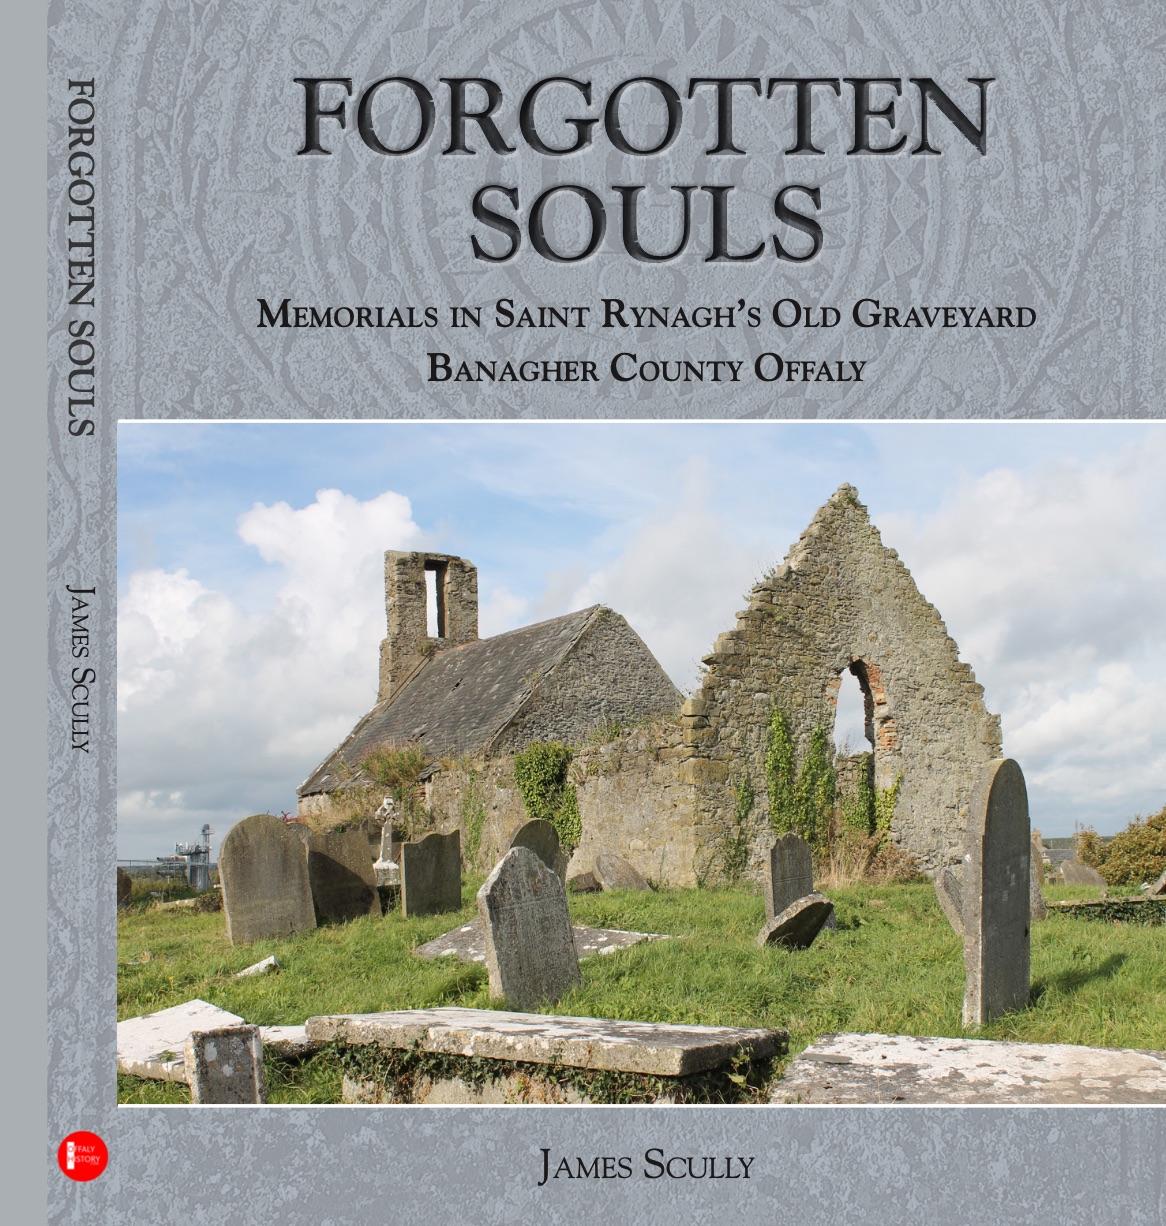 FORGOTTEN SOULS by James Scully